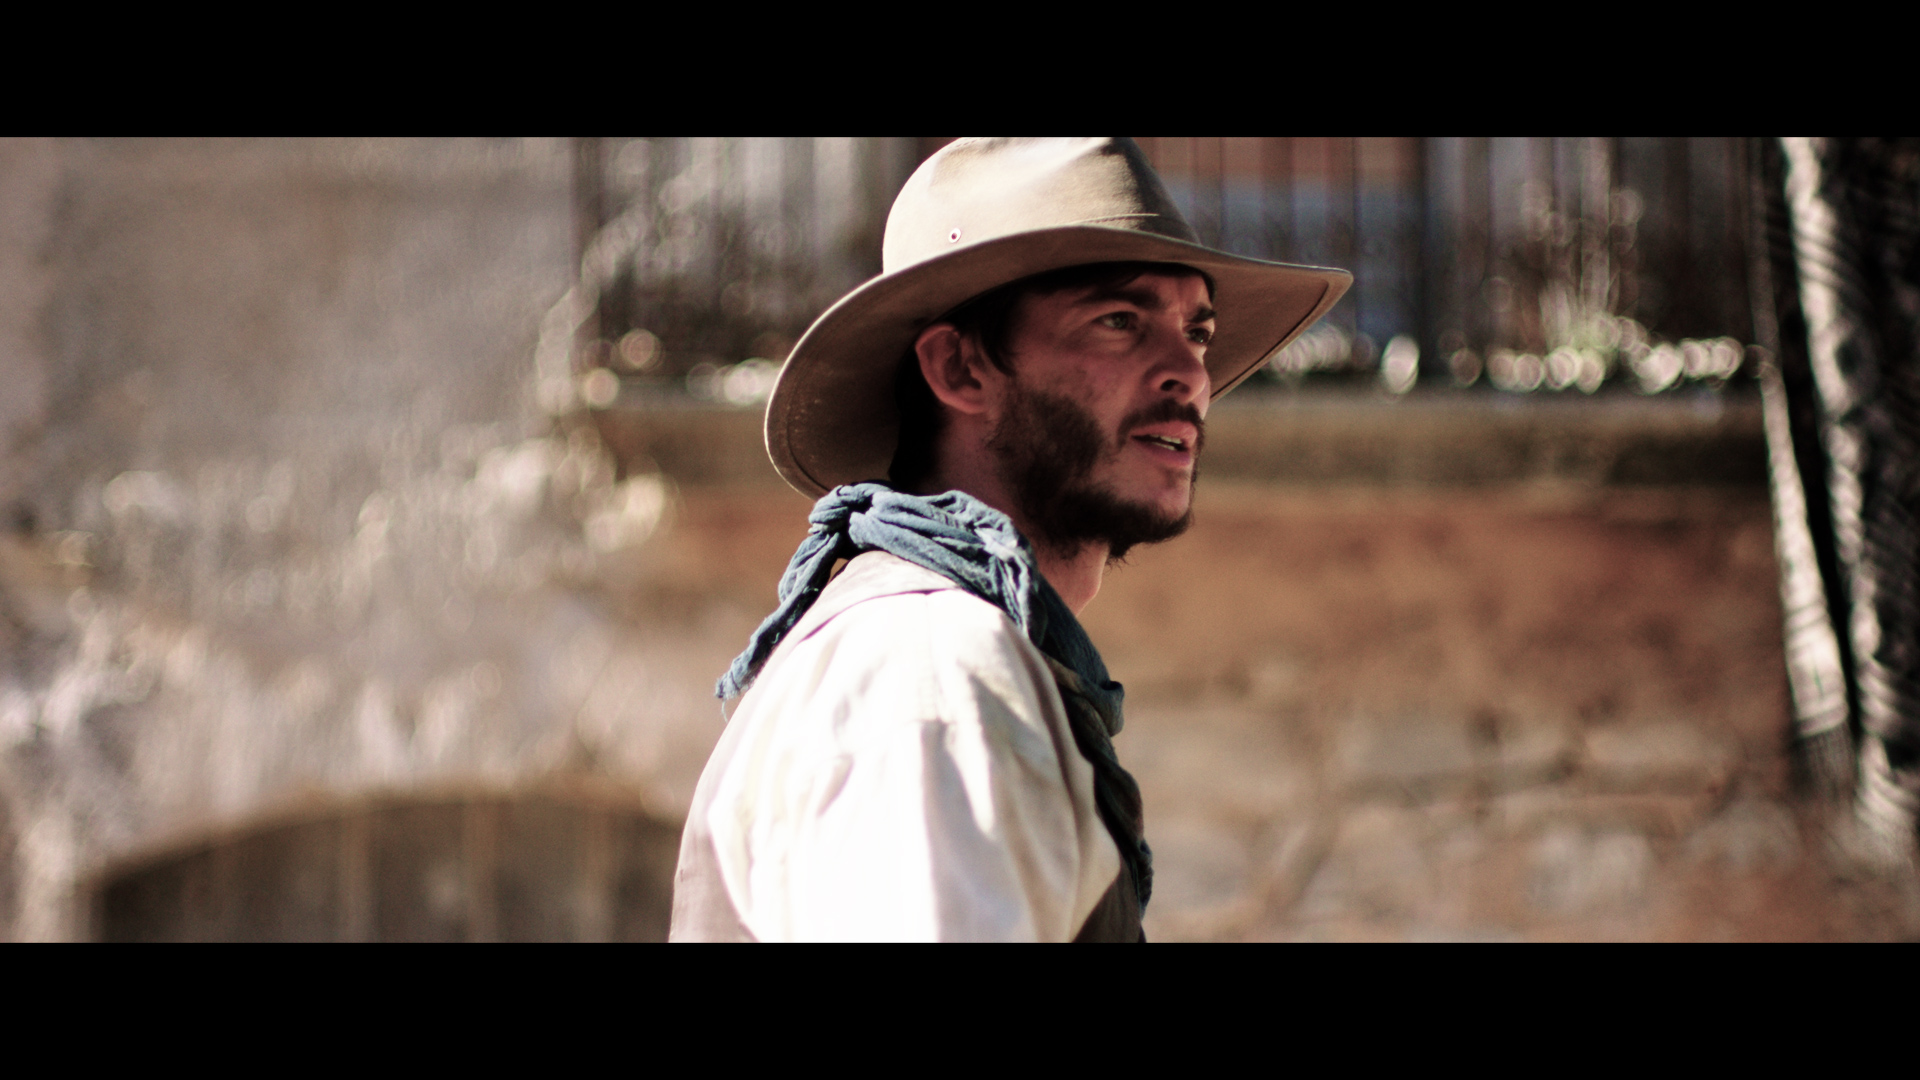 Watch Gunfight at Dry River